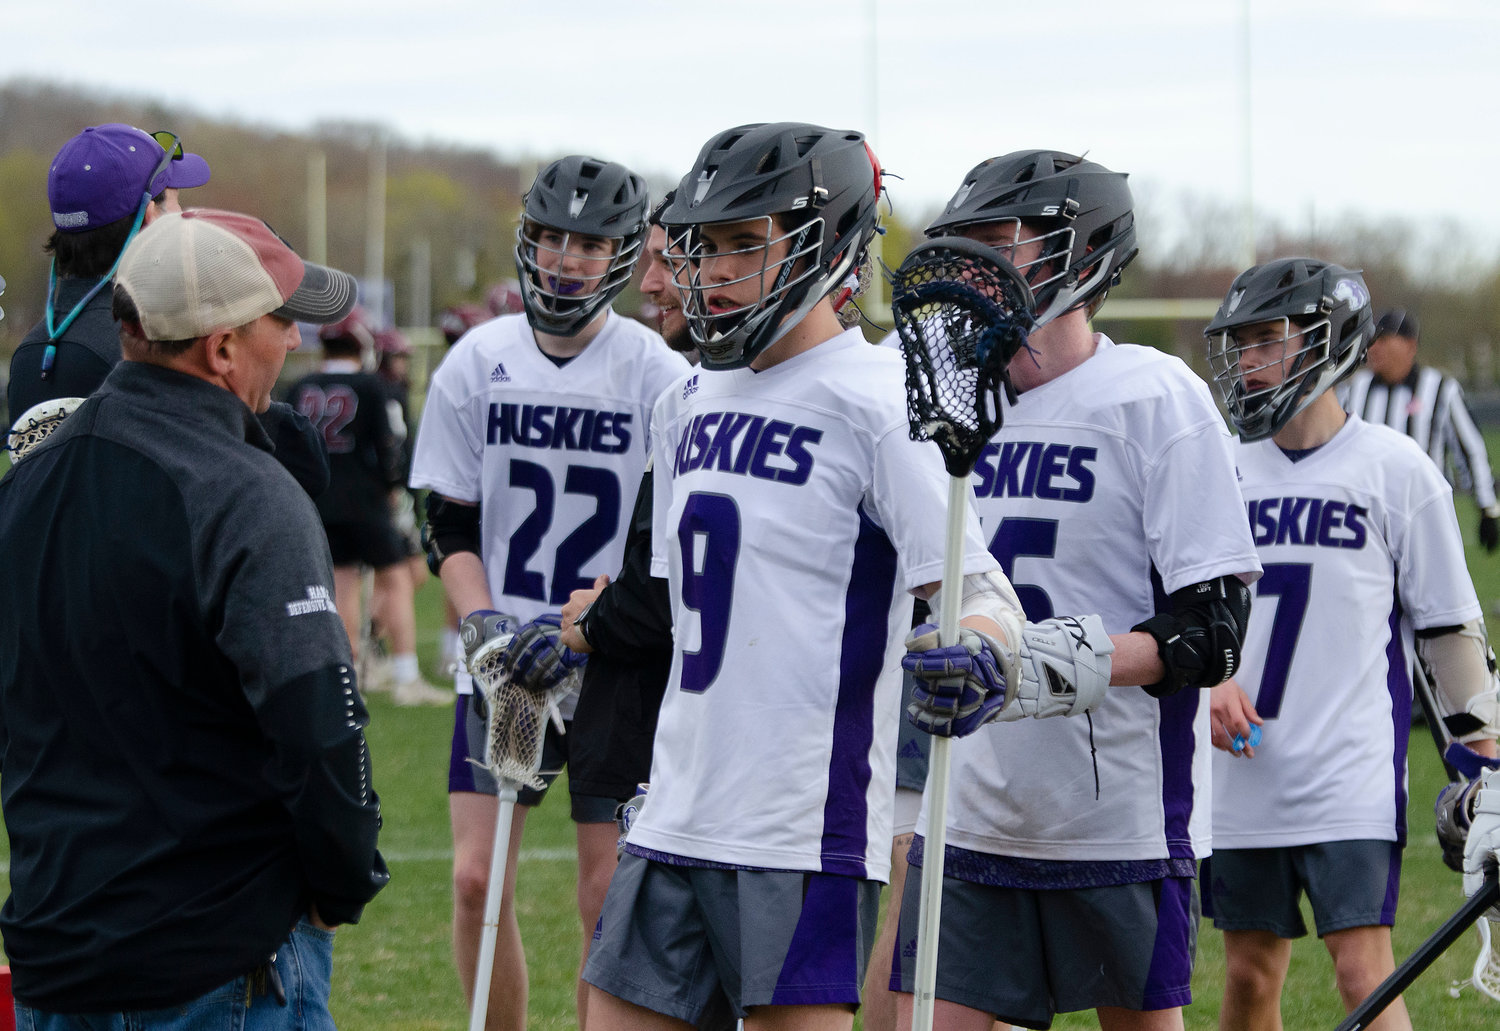 Assistant coach Ted Hanley (left) speaks to Riley Spina (mid-left), Colin Dos Santos, Gordon Kopecky and others during a time out.